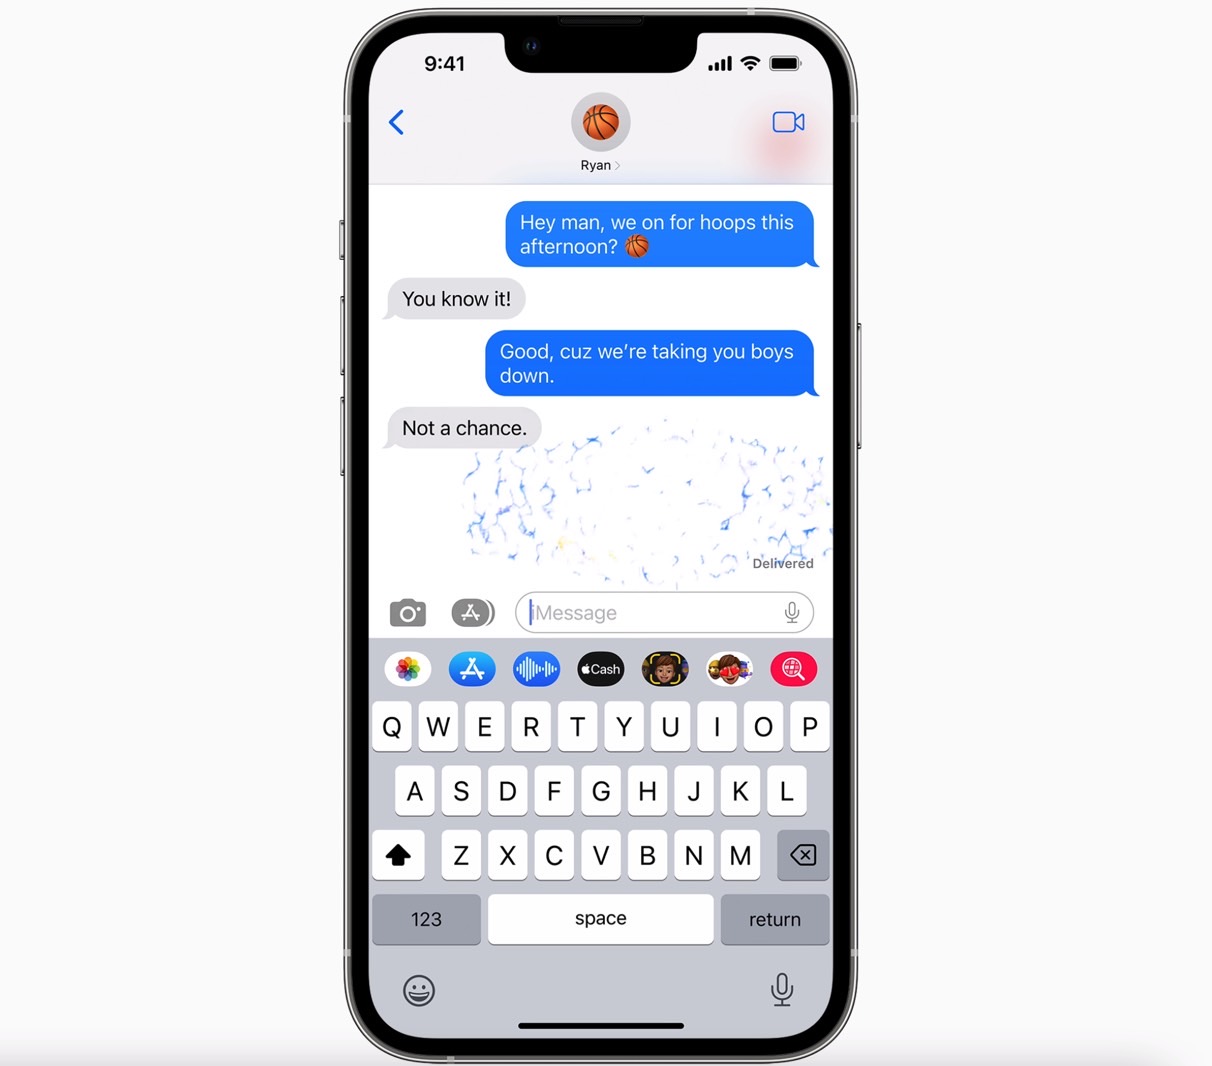 When you unsend an iMessage in iOS 16, the text will blow up.